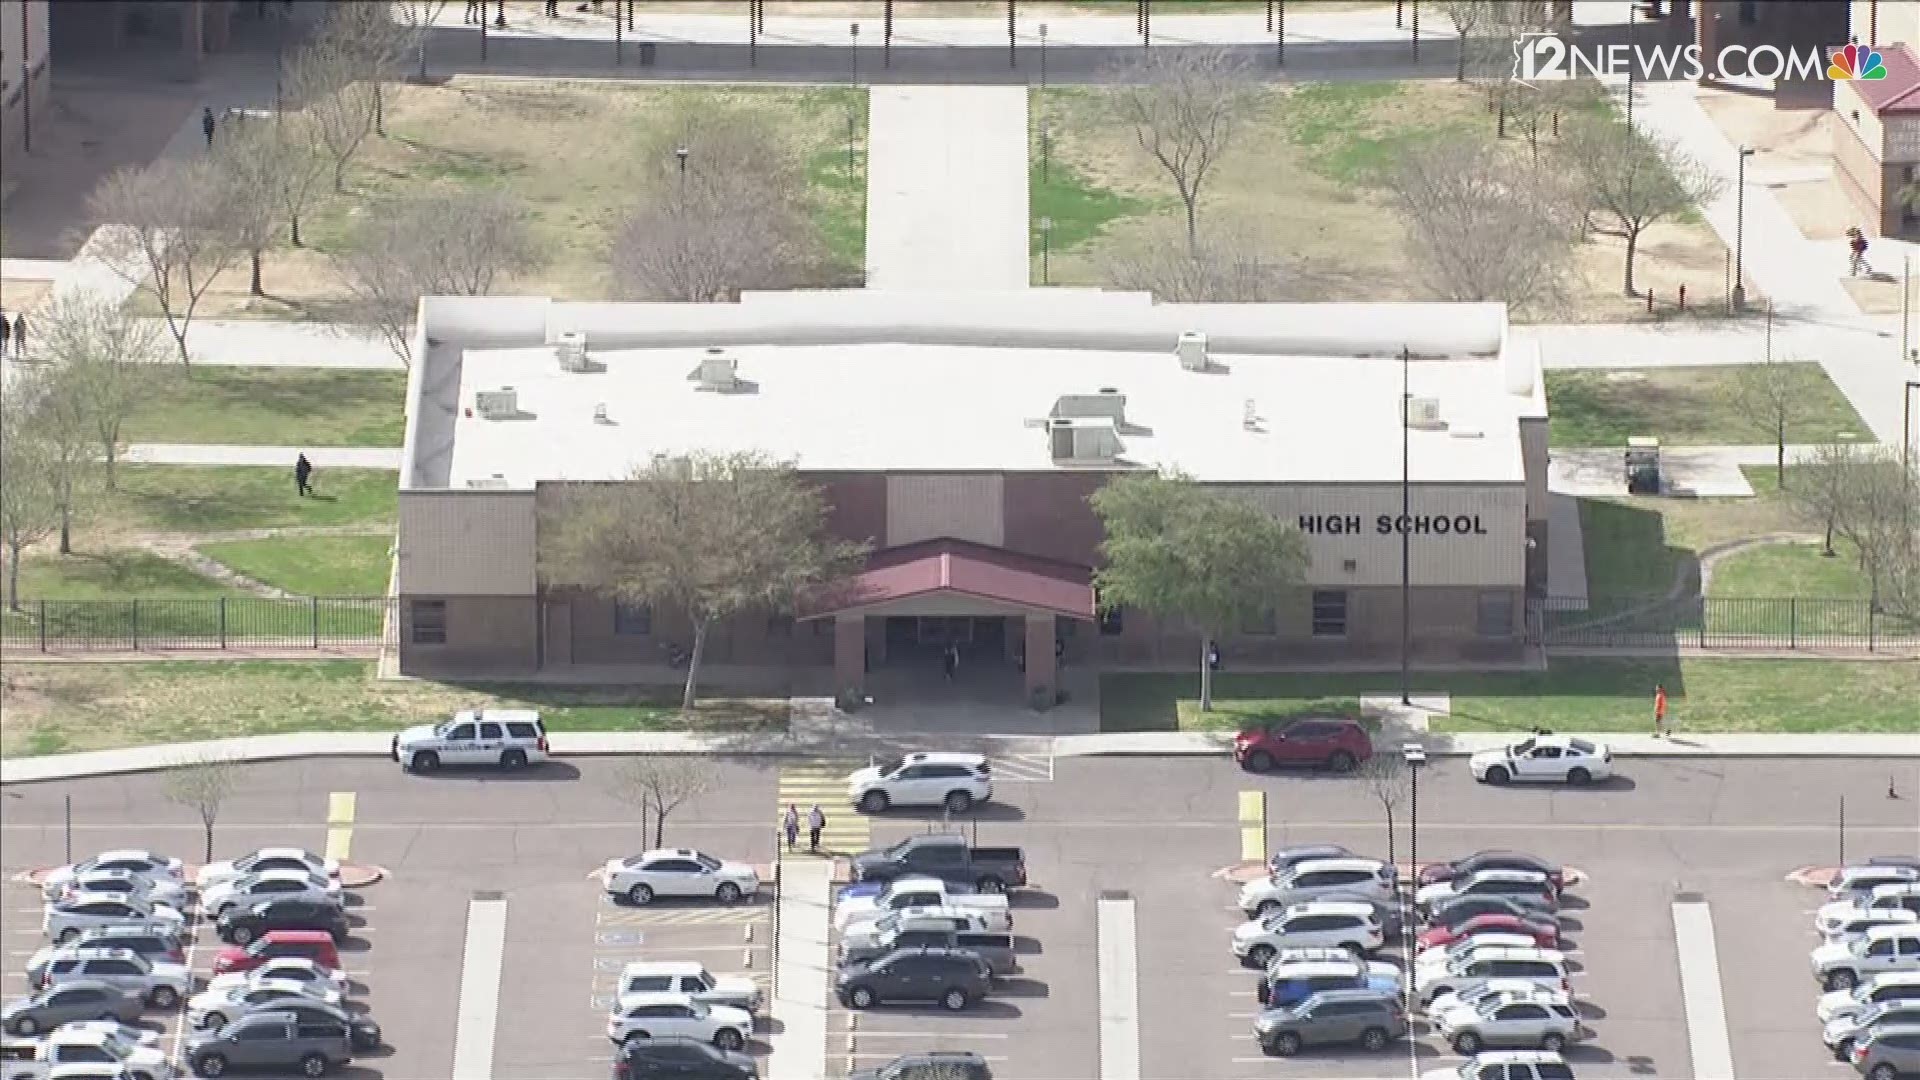 Officials are investigating a threat found on a bathroom wall inside Basha High School in Chandler, police confirmed. The threat referenced the date Thursday, March 7, according to a letter sent home to parents.